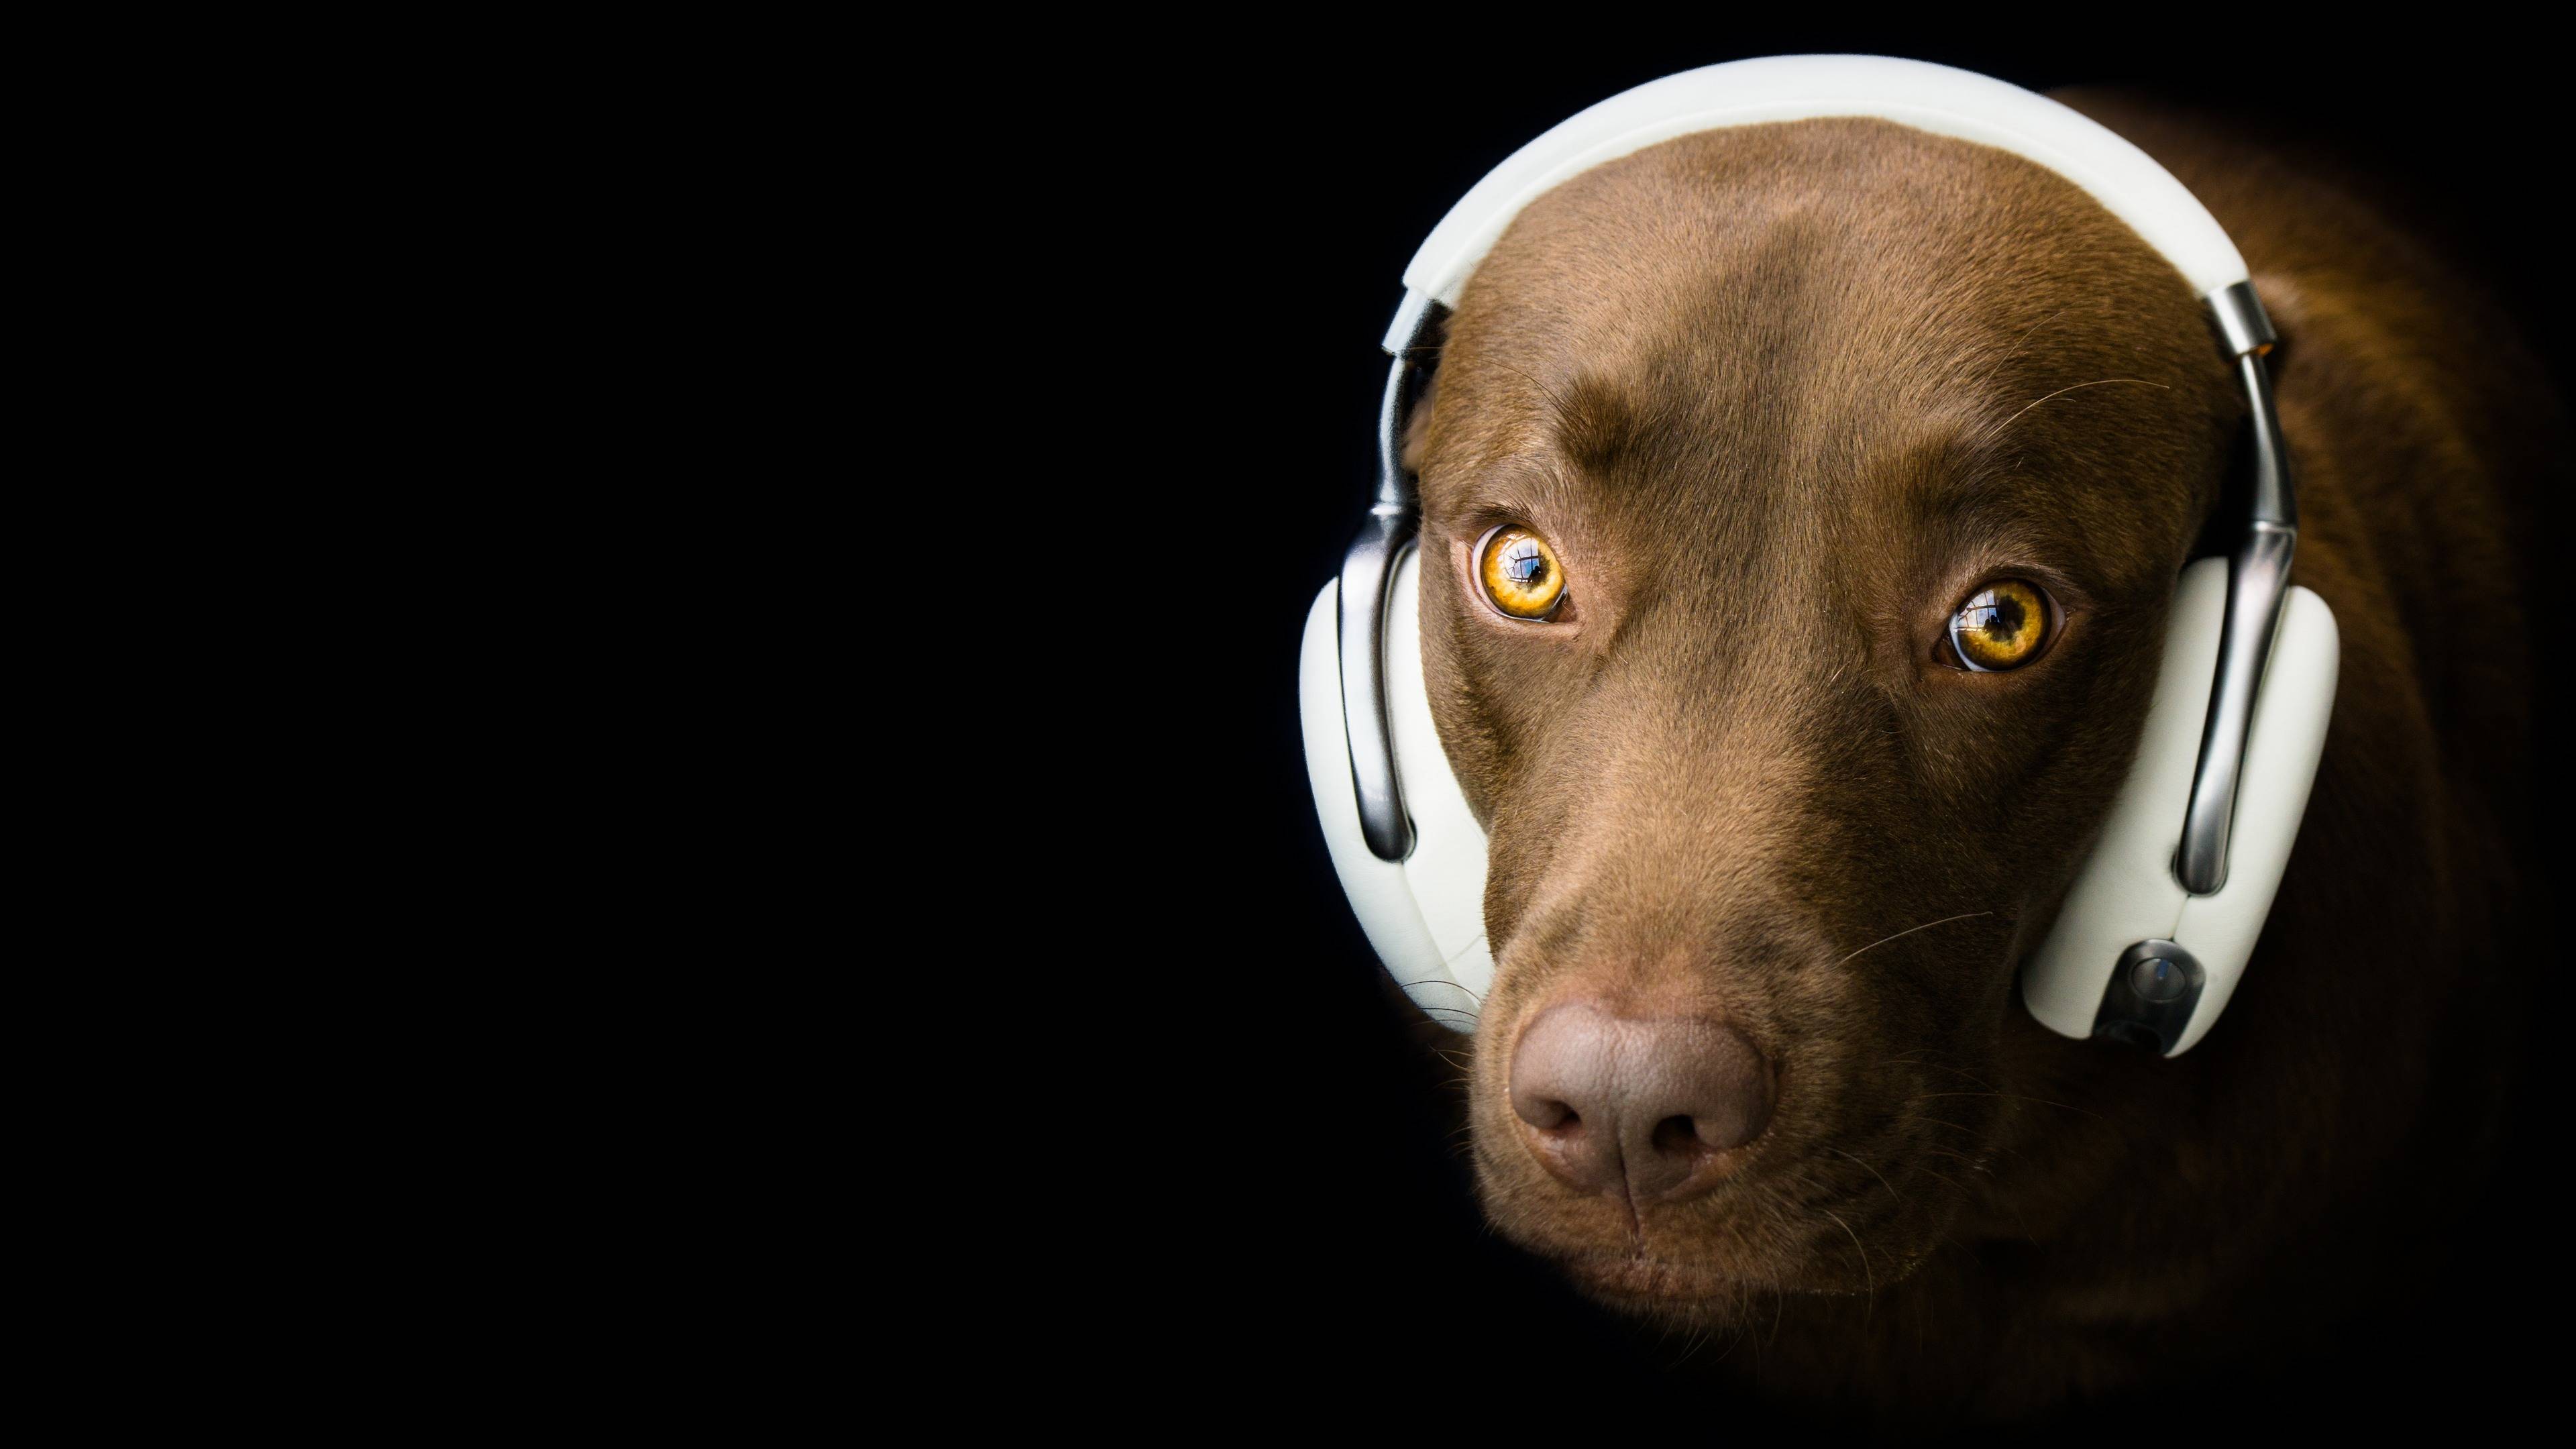 Wallpapers dog a dog with headphones music on the desktop